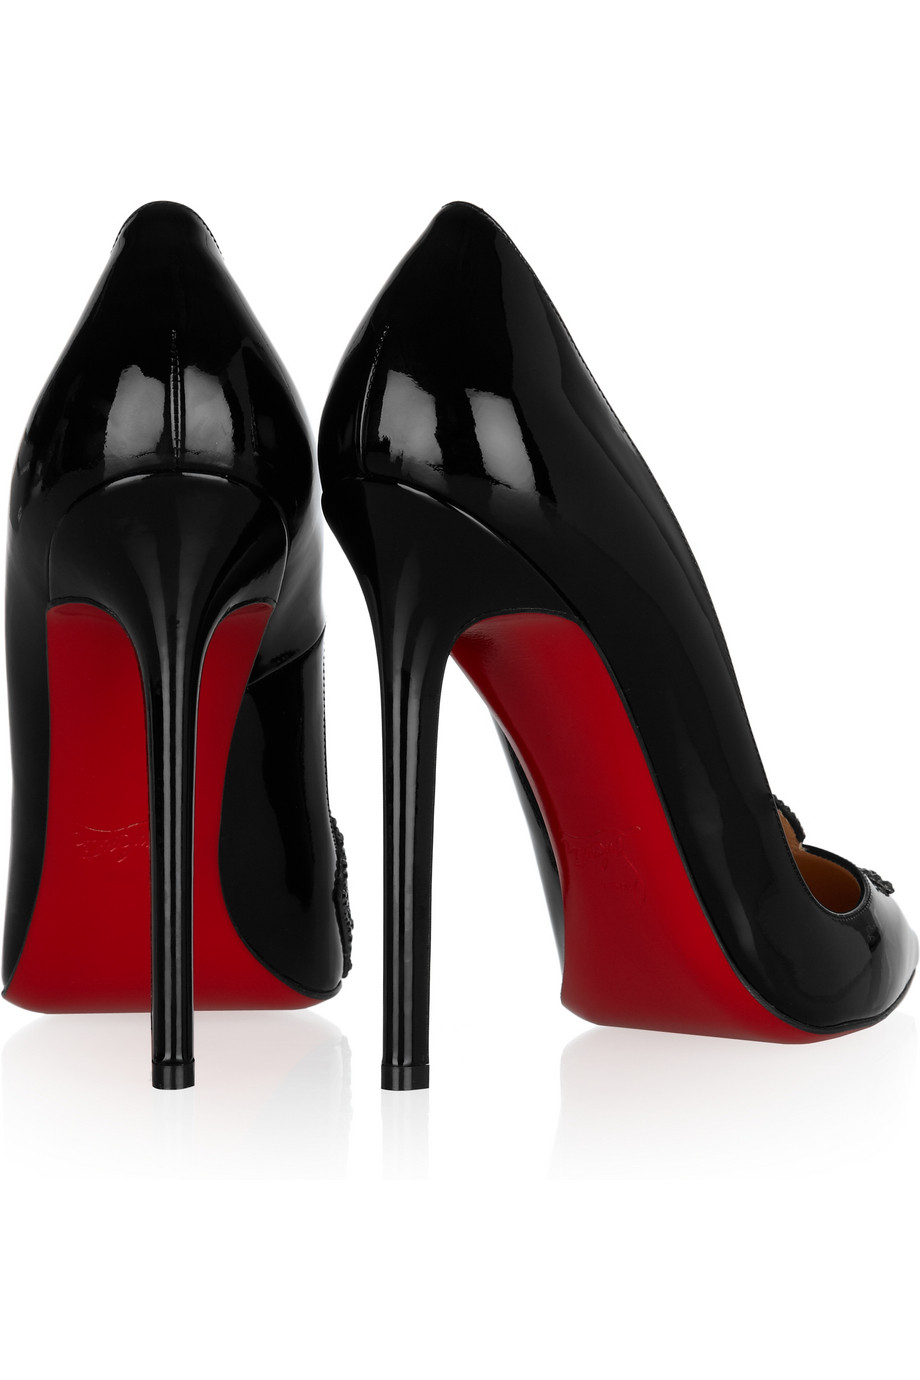 Christian Louboutin Sex 120 Patent-Leather Pumps in Gray (Black) - Lyst